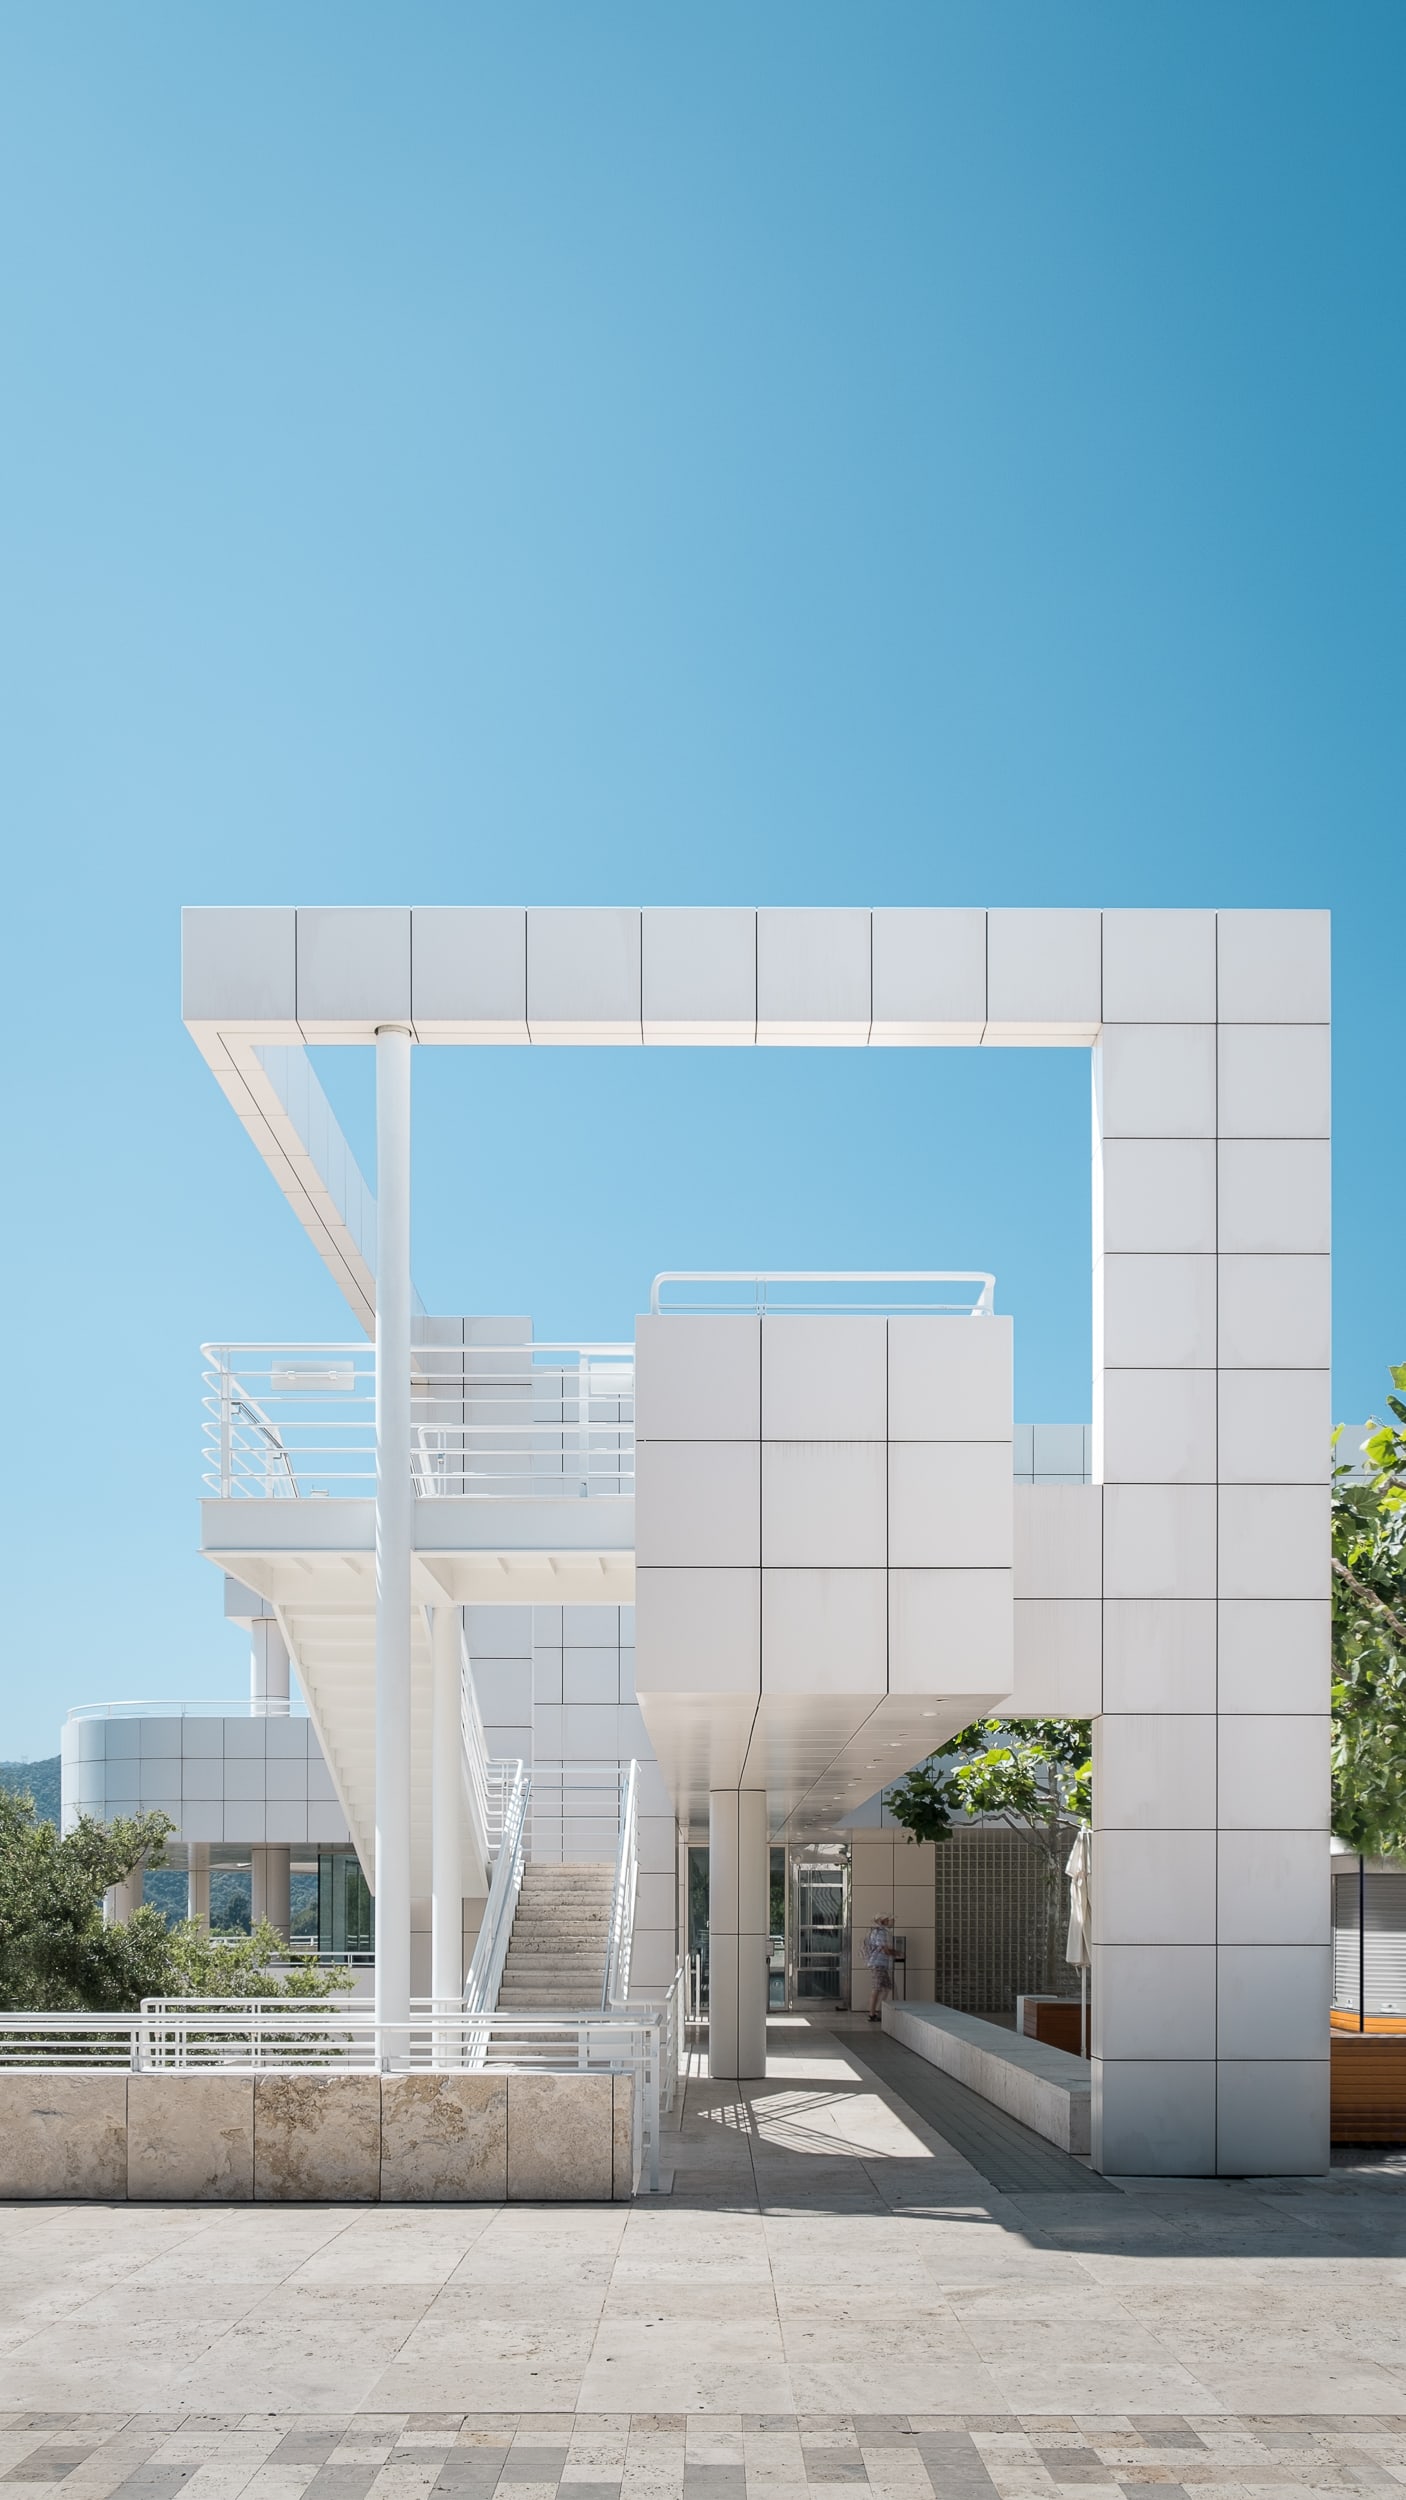 Architectural Photograph of the Getty Center in Los Angeles designed by Richard Meier and Partners featuring a one point perspective of the cafe building's unique shape from the entrance and characteristic white paneling